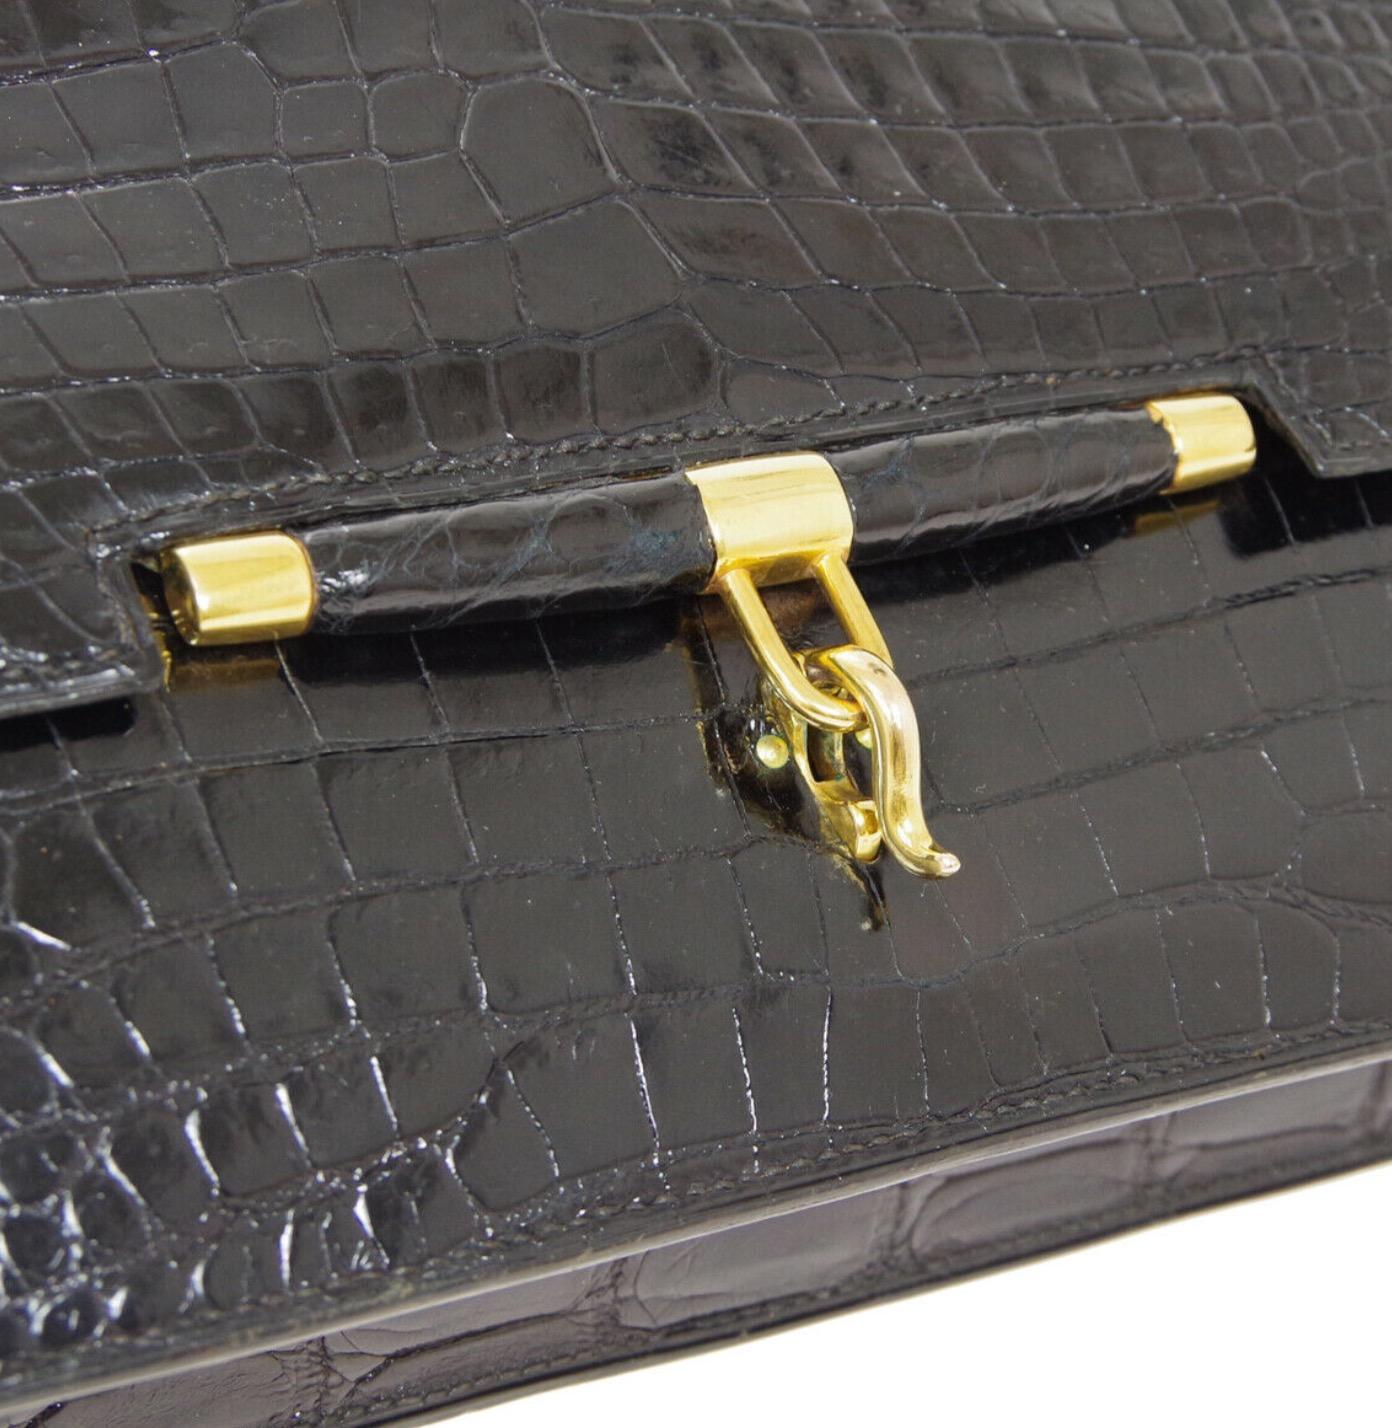 Hermes Black Crocodile Exotic Leather Gold Top handle Satchel Kelly Flap Bag

Crocodile
Gold tone hardware
Leather lining
Made in France
Handle drop 5.5